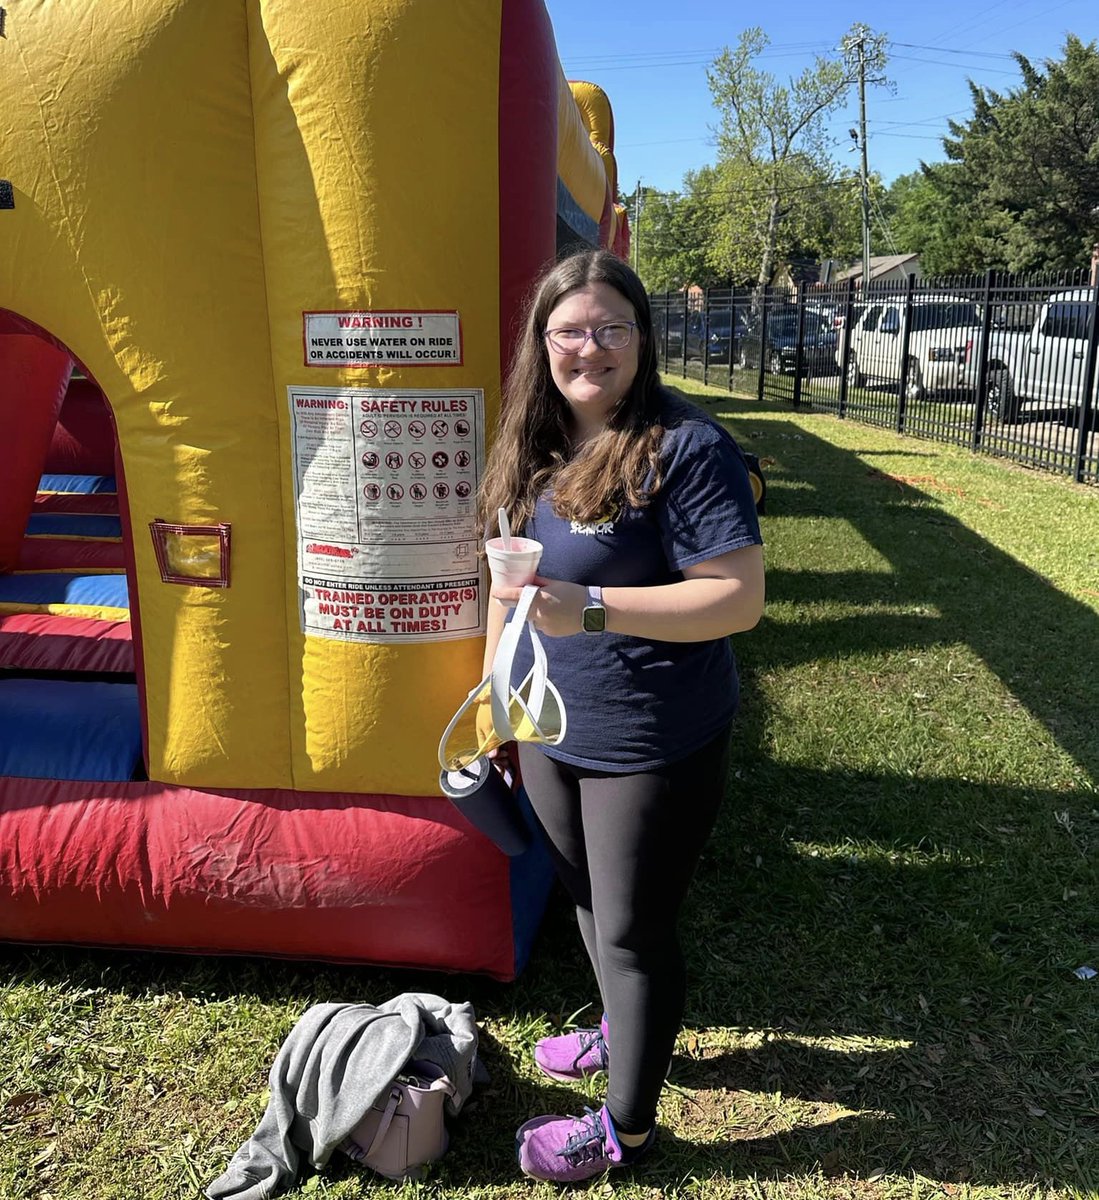 Students from several MCPSS schools helped out at Spring Fling & Field Day events recently. NJHS students from Semmes Middle volunteered at Wilmer Elementary's field day, while students from @PanthersMurphy & @WilliamsonLions helped out at Council Traditional. #AimForExcellence